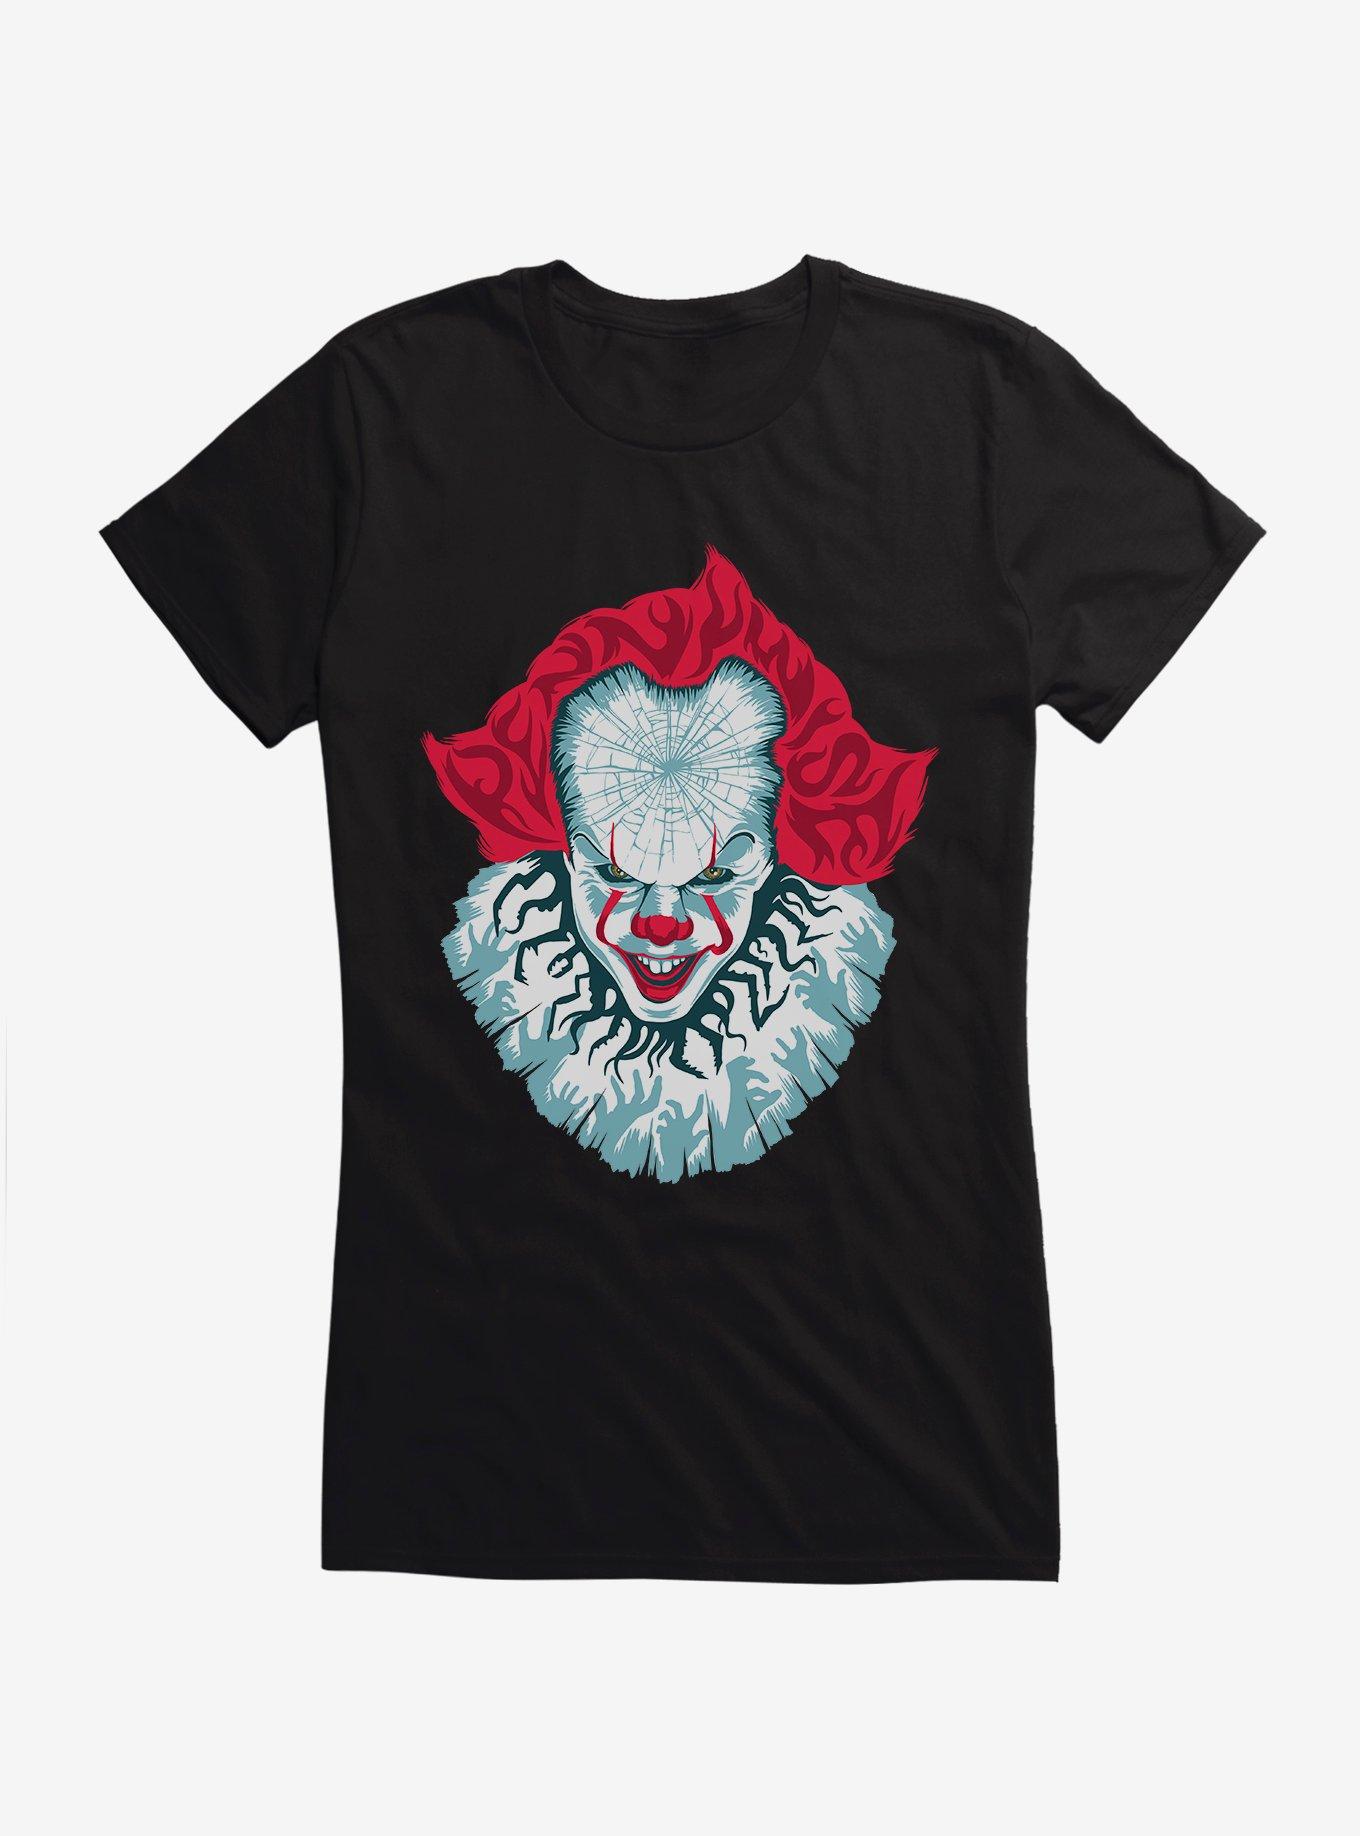 IT Chapter Two Vibrant Pennywise Script Art Girls T-Shirt, BLACK, hi-res